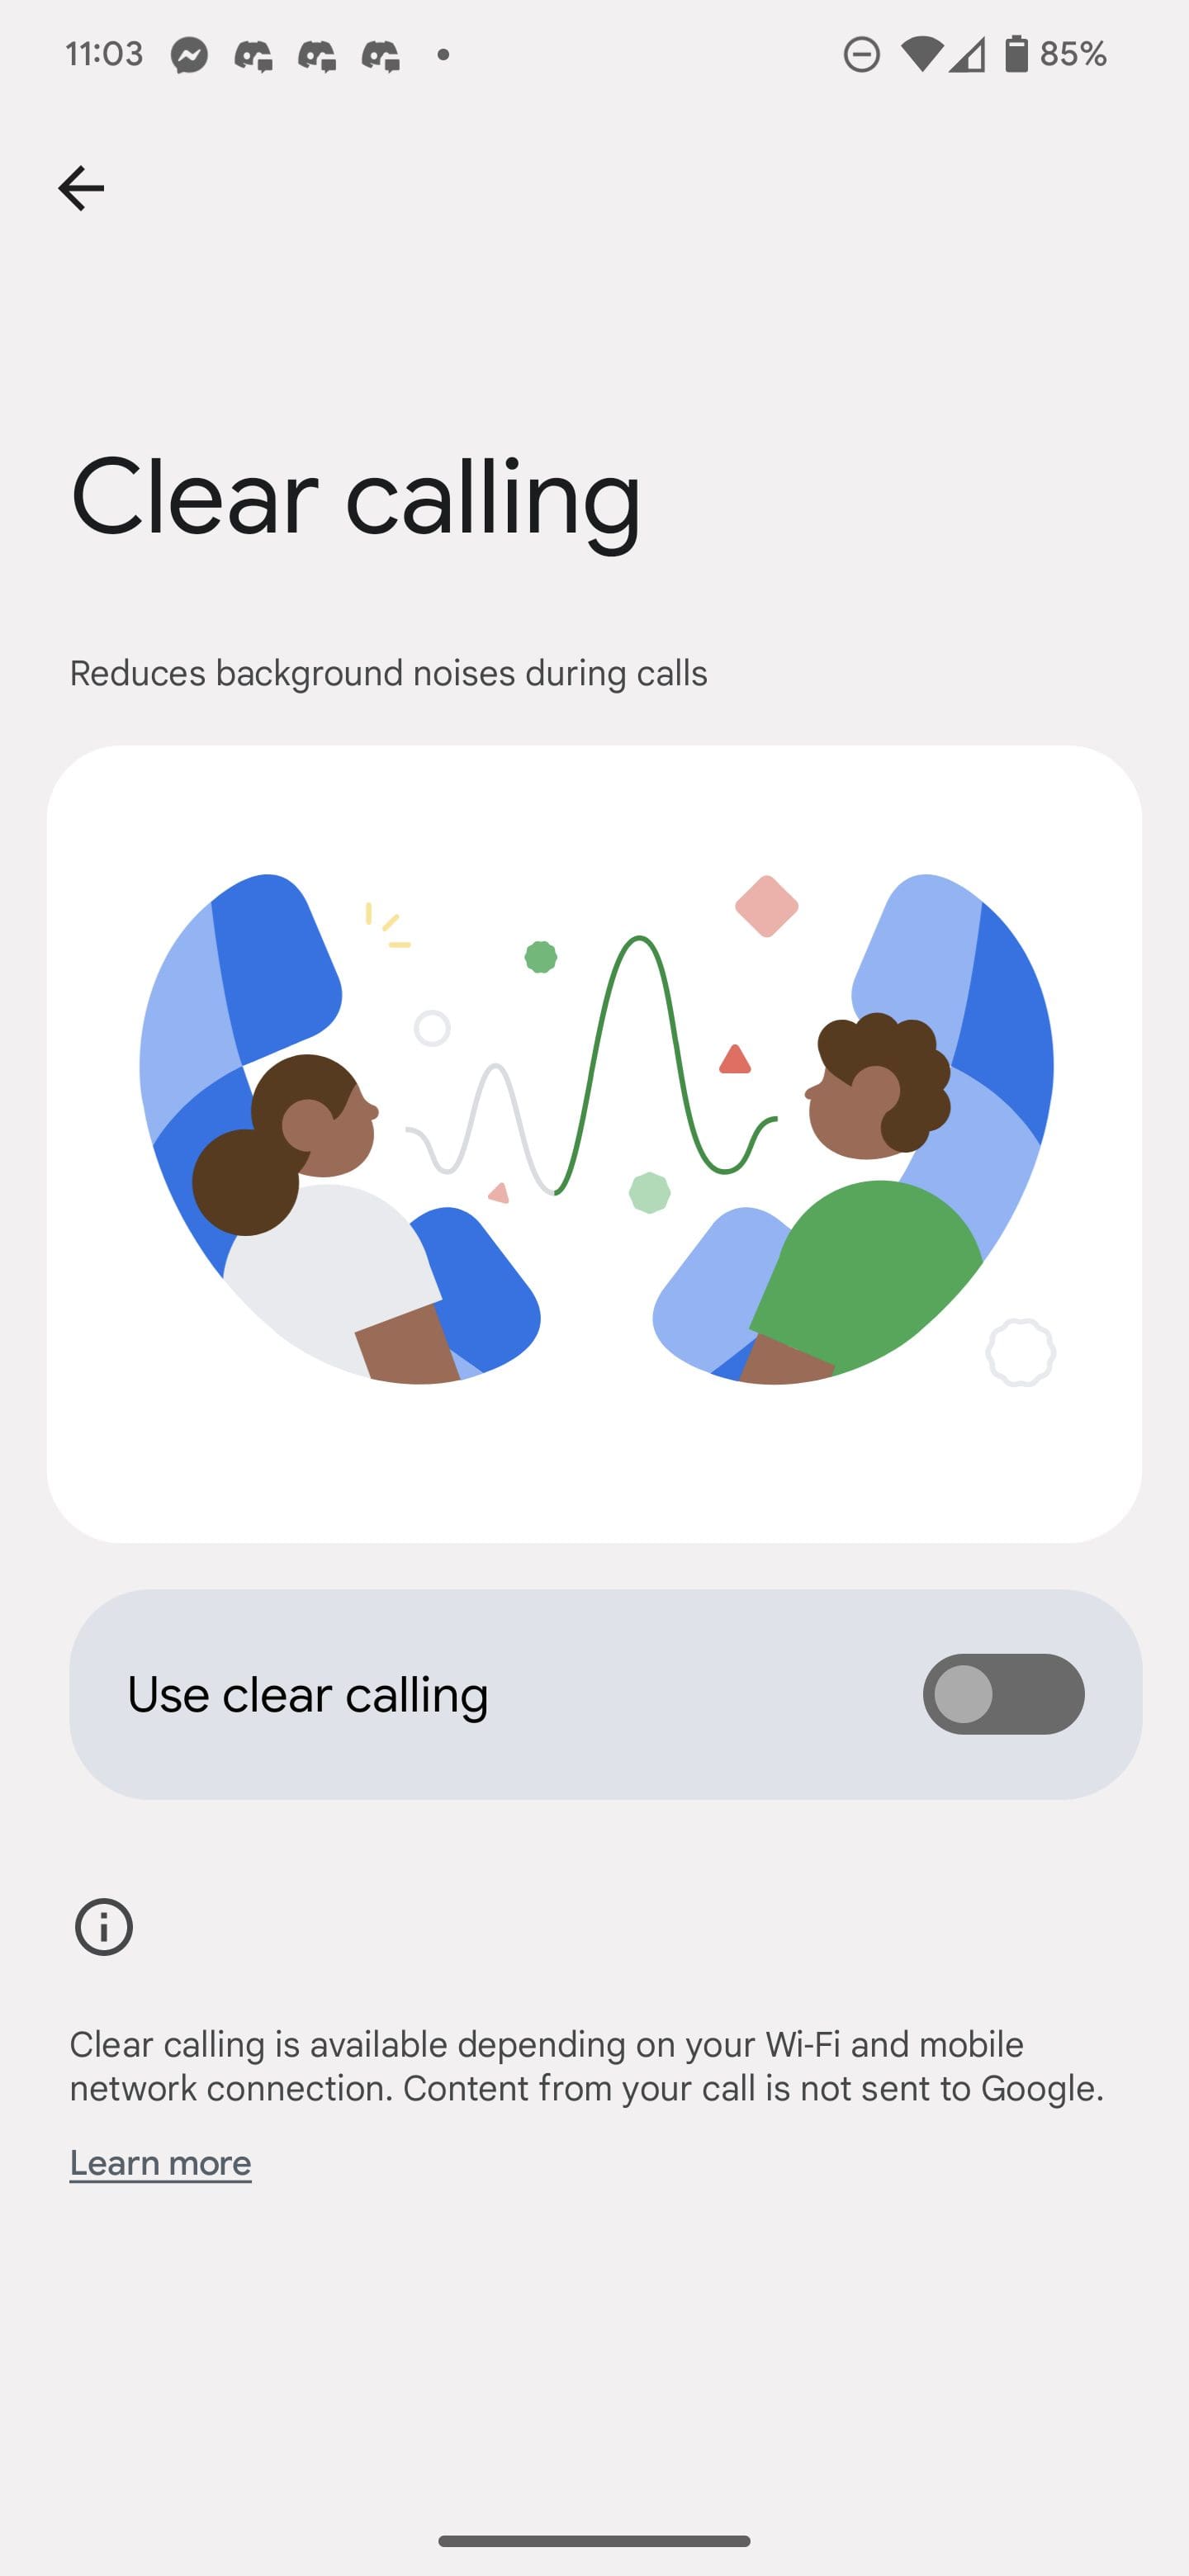 How to Use Clear Calling - 3